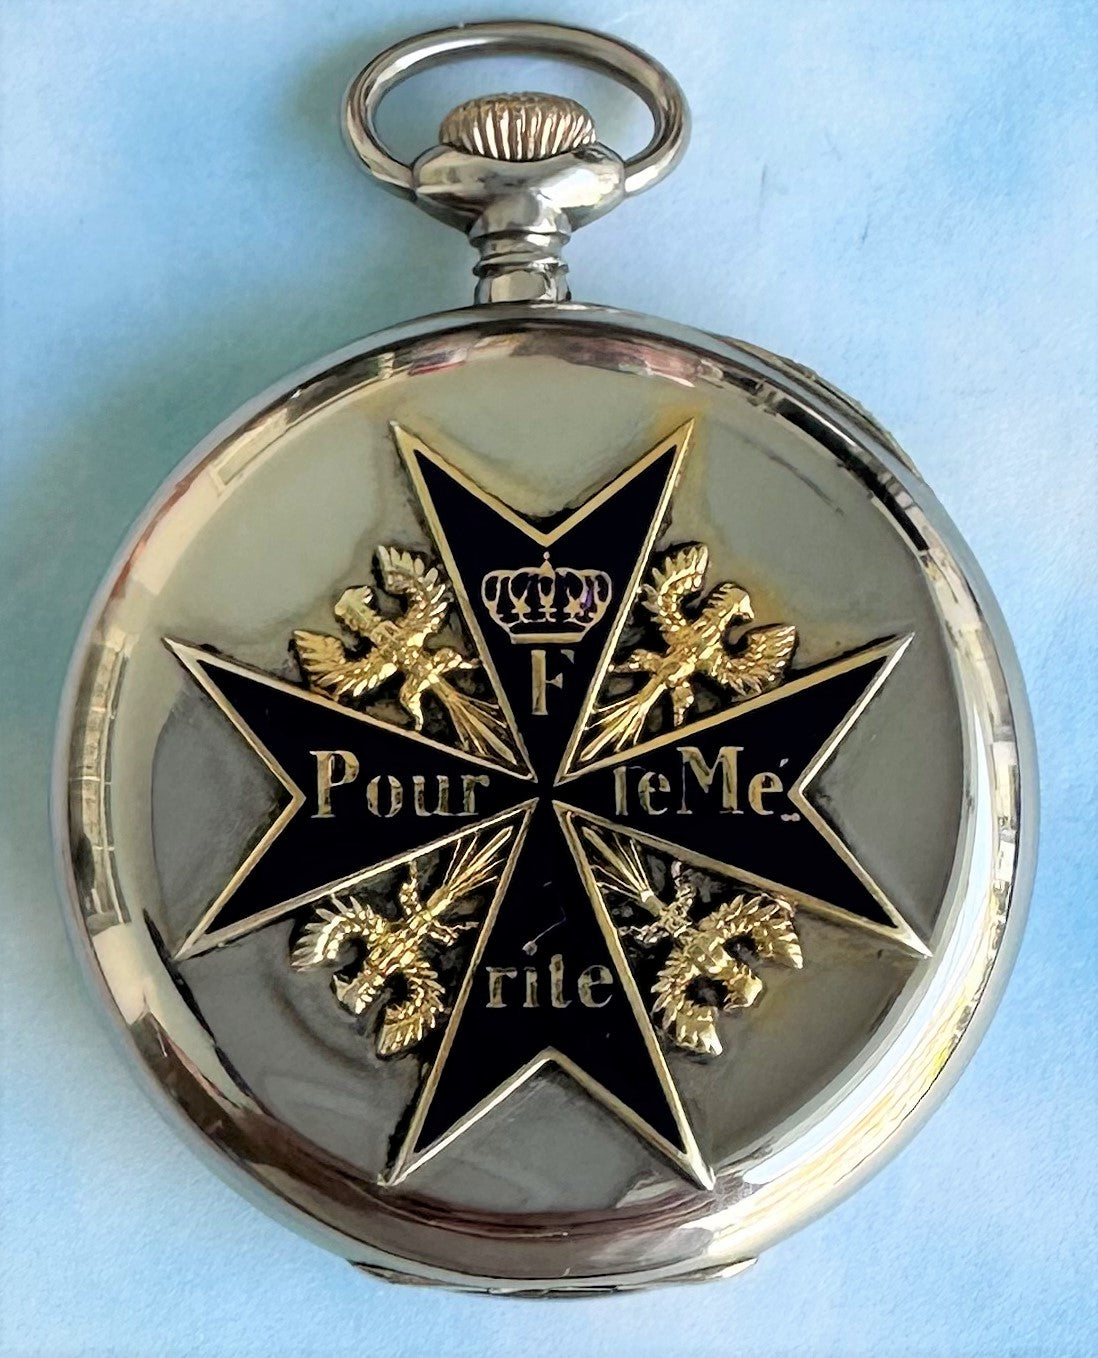 Prussia Presentation Watch from Kaiser Wilhelm II to an award recipient of the Oren Pour le Merite - Derrittmeister Militaria Group